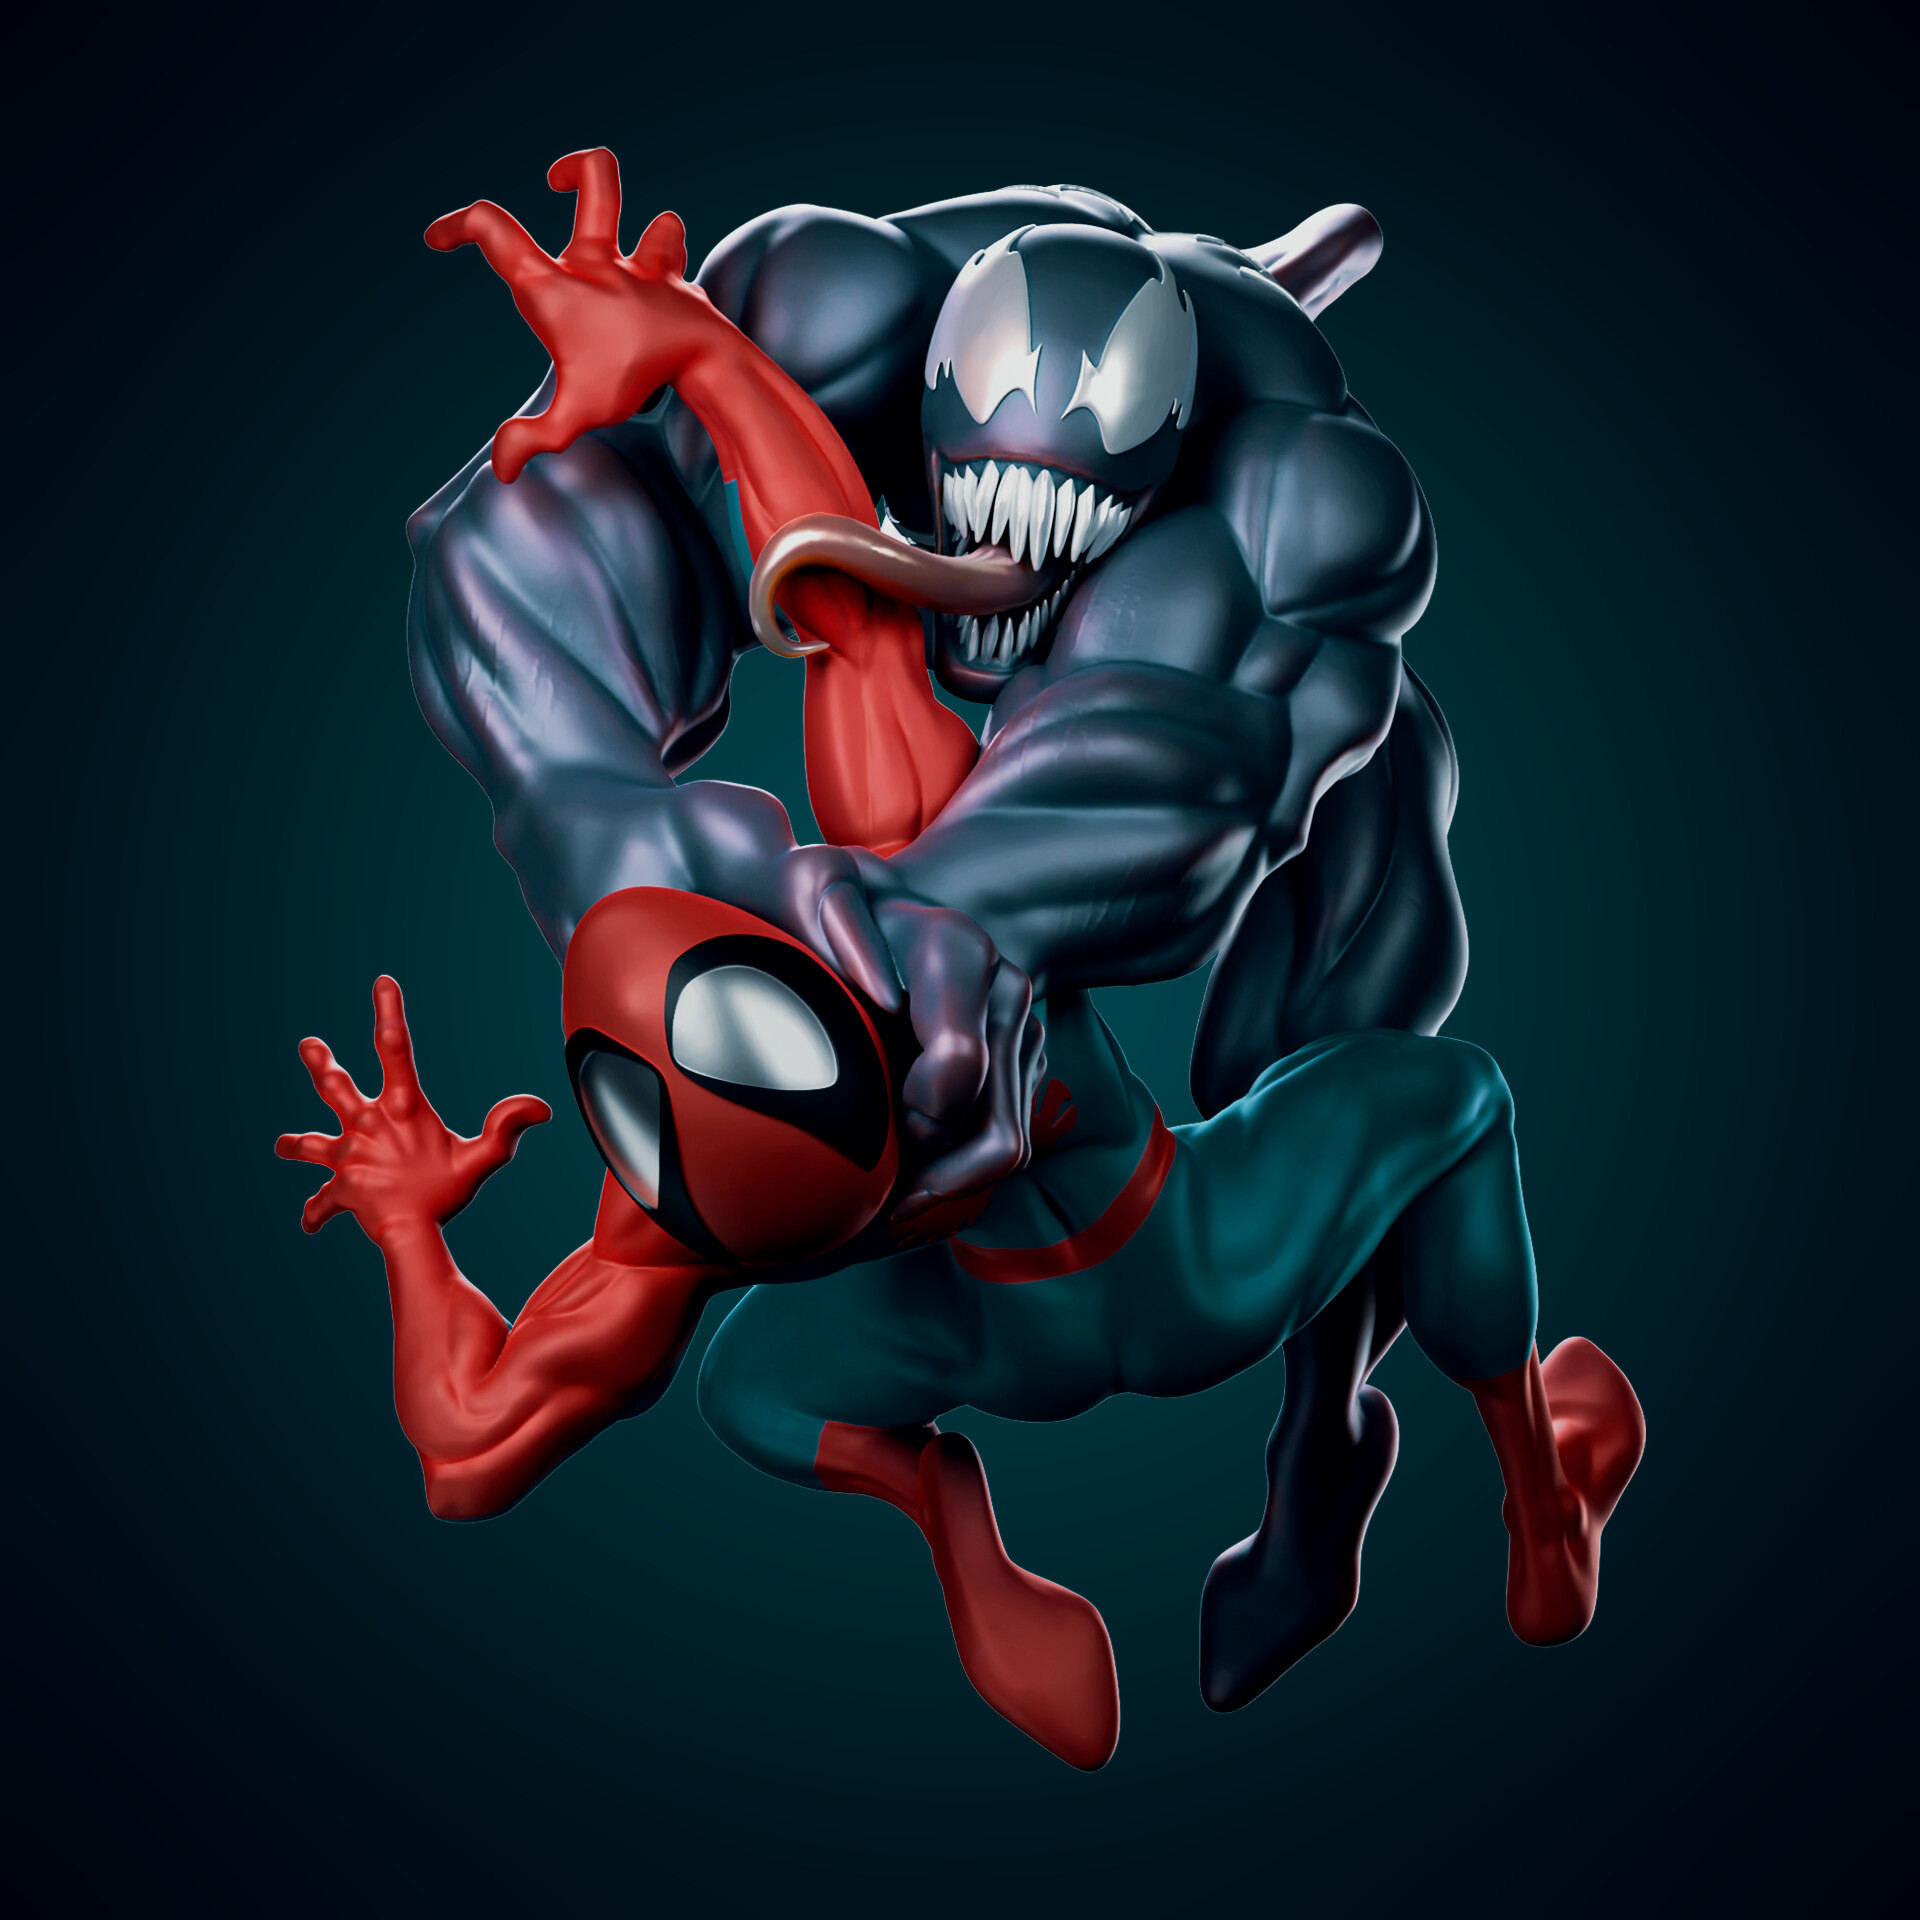 Cool Spider-man Pose by ComicDan on Newgrounds